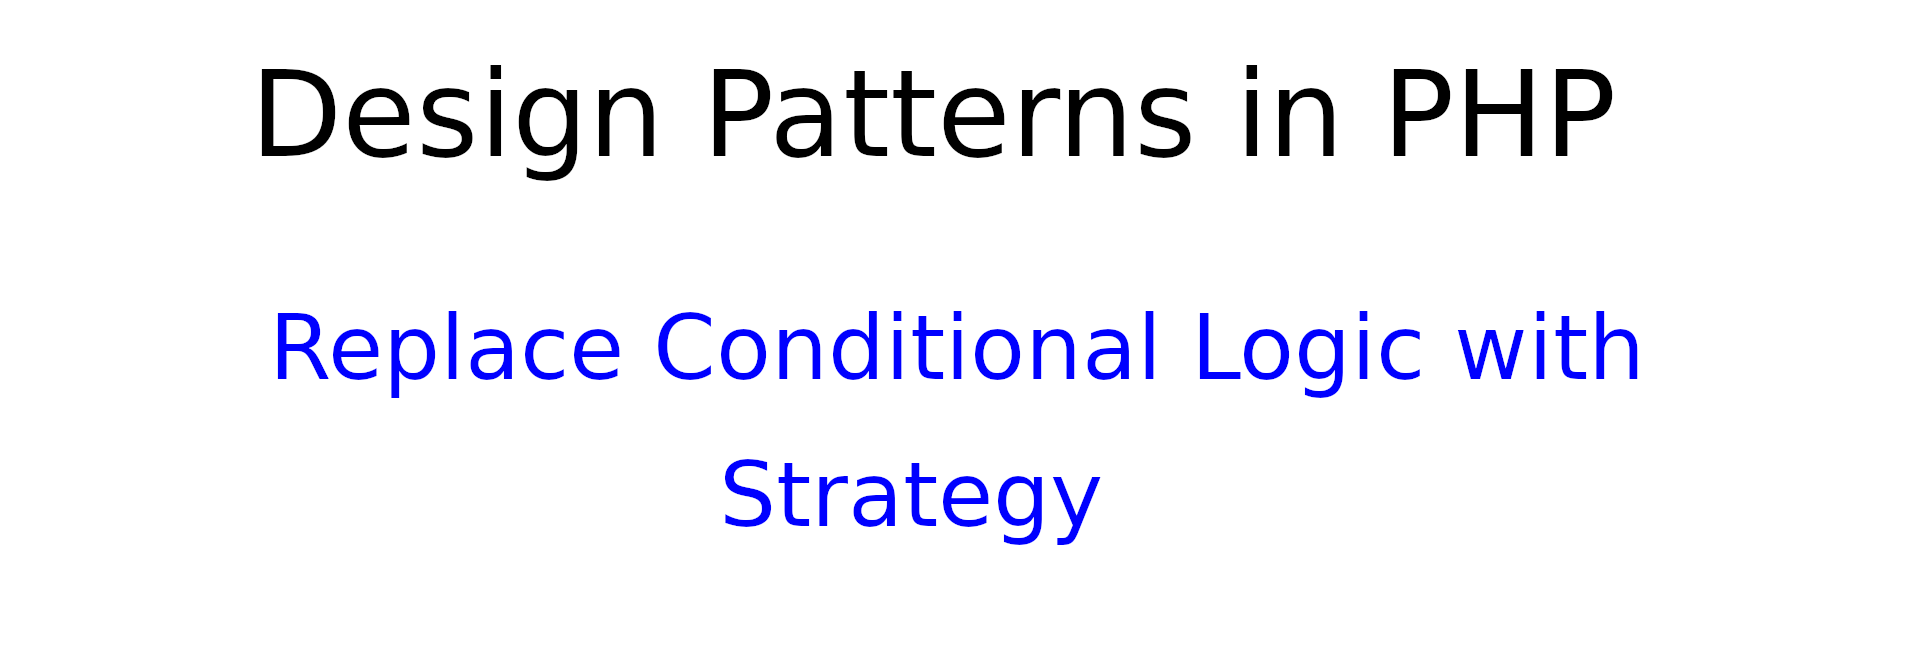 Design patterns in PHP: Strategy